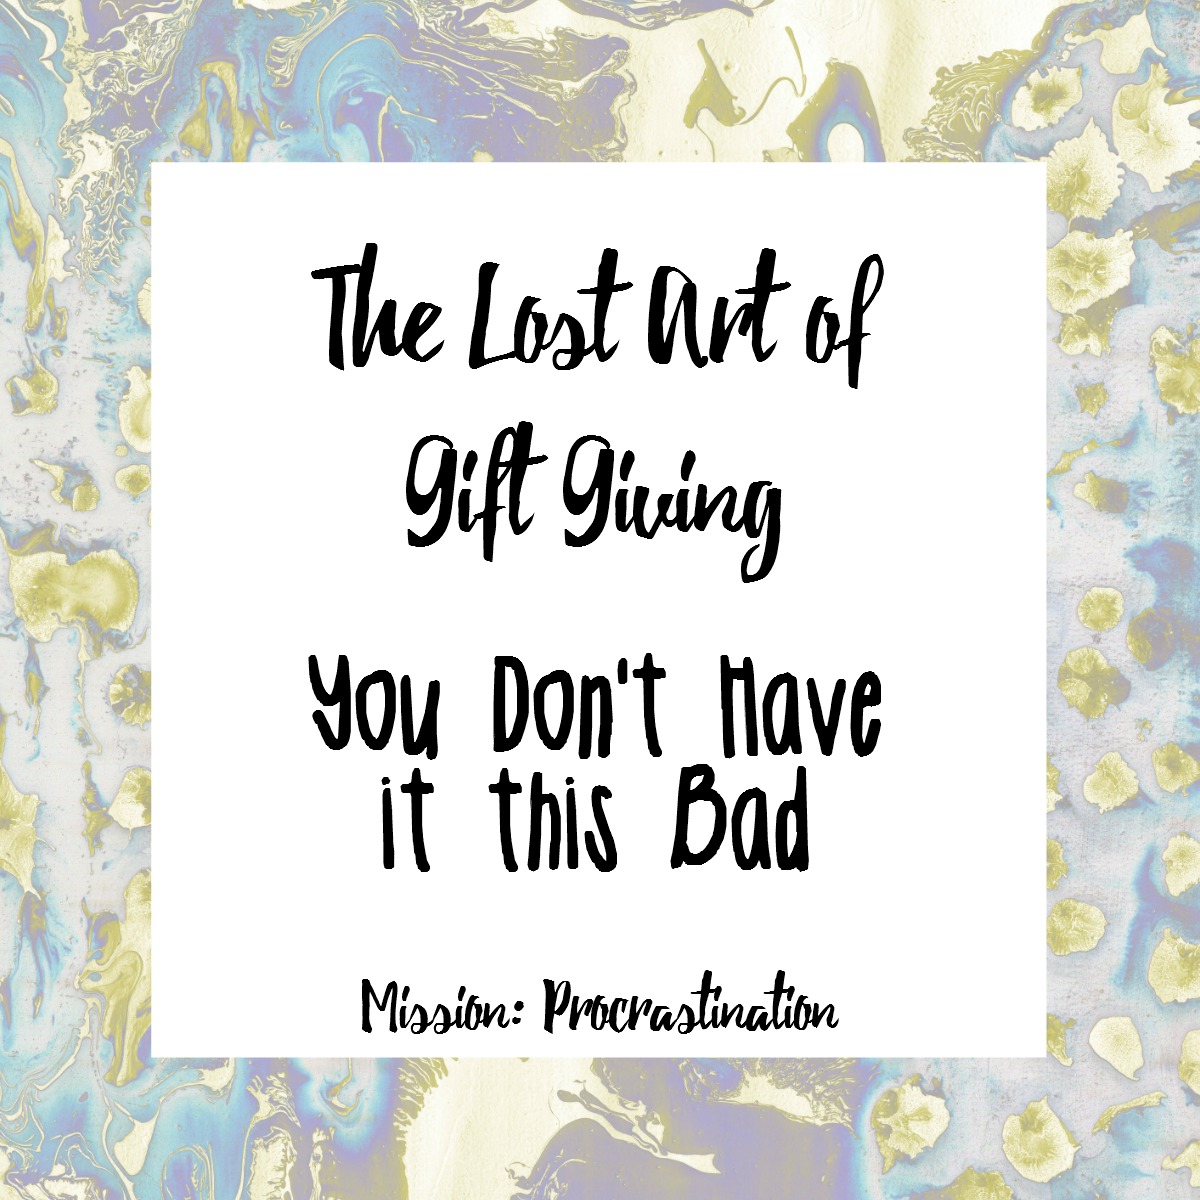 The Lost Art of Gift Giving